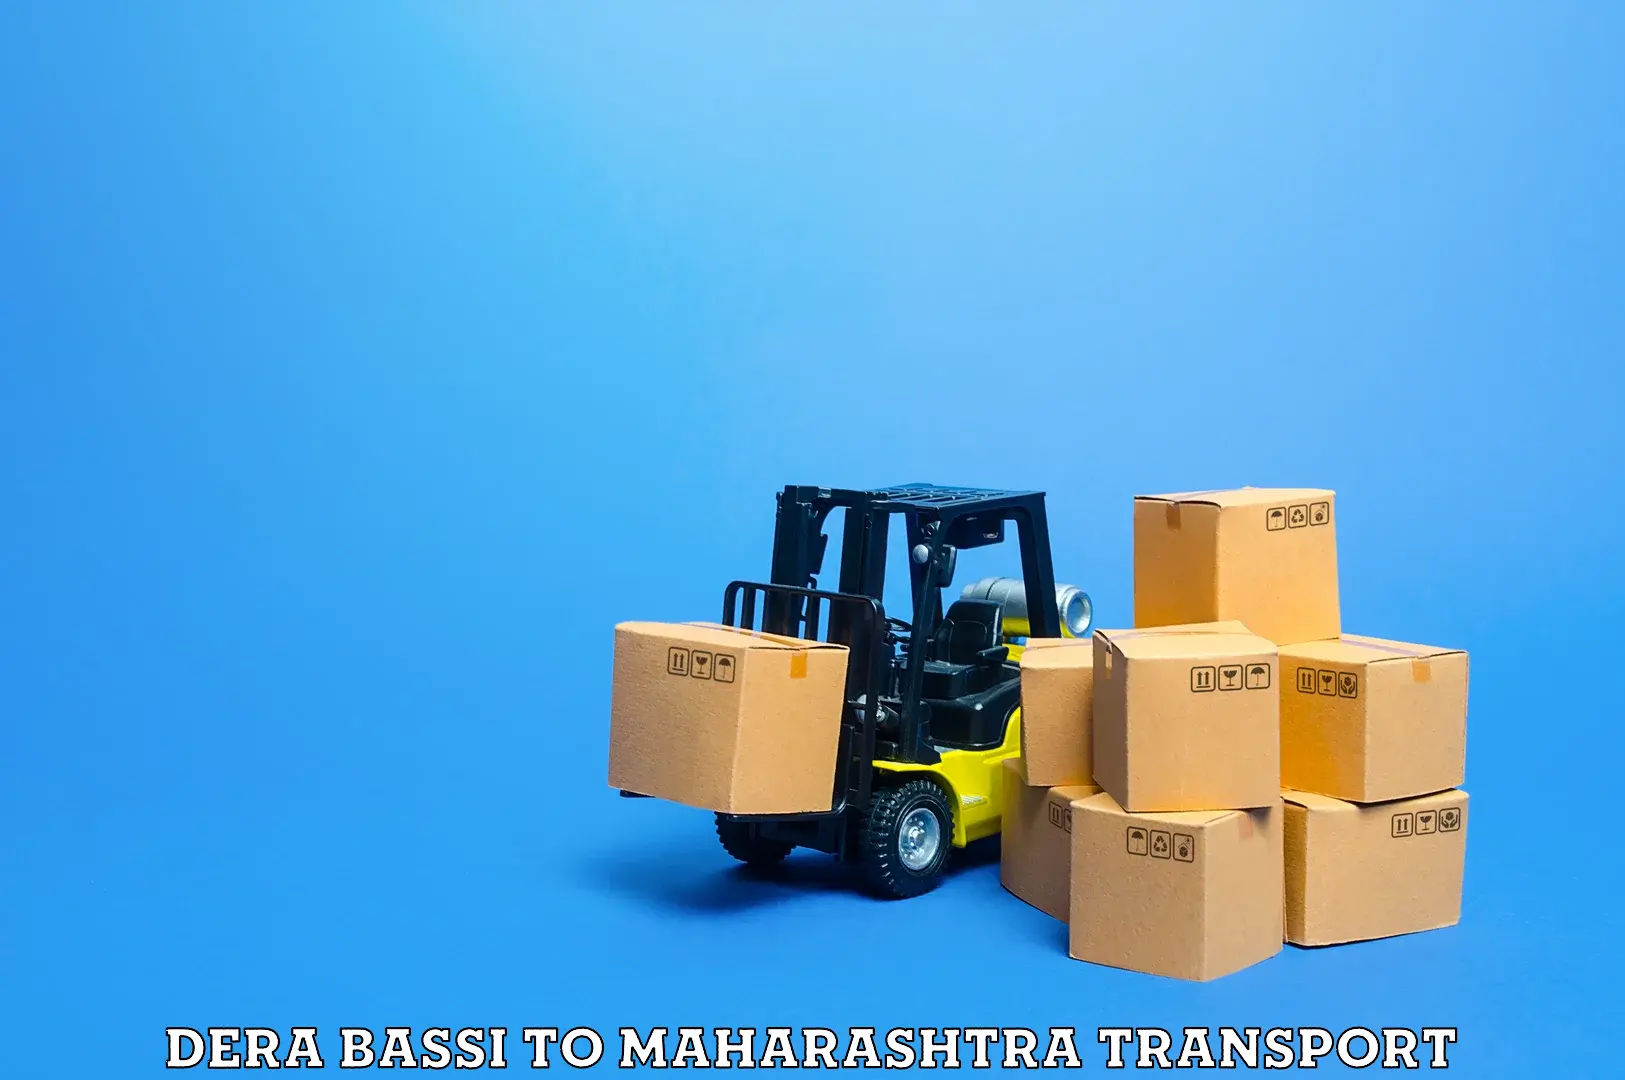 Online transport service Dera Bassi to Dharmabad